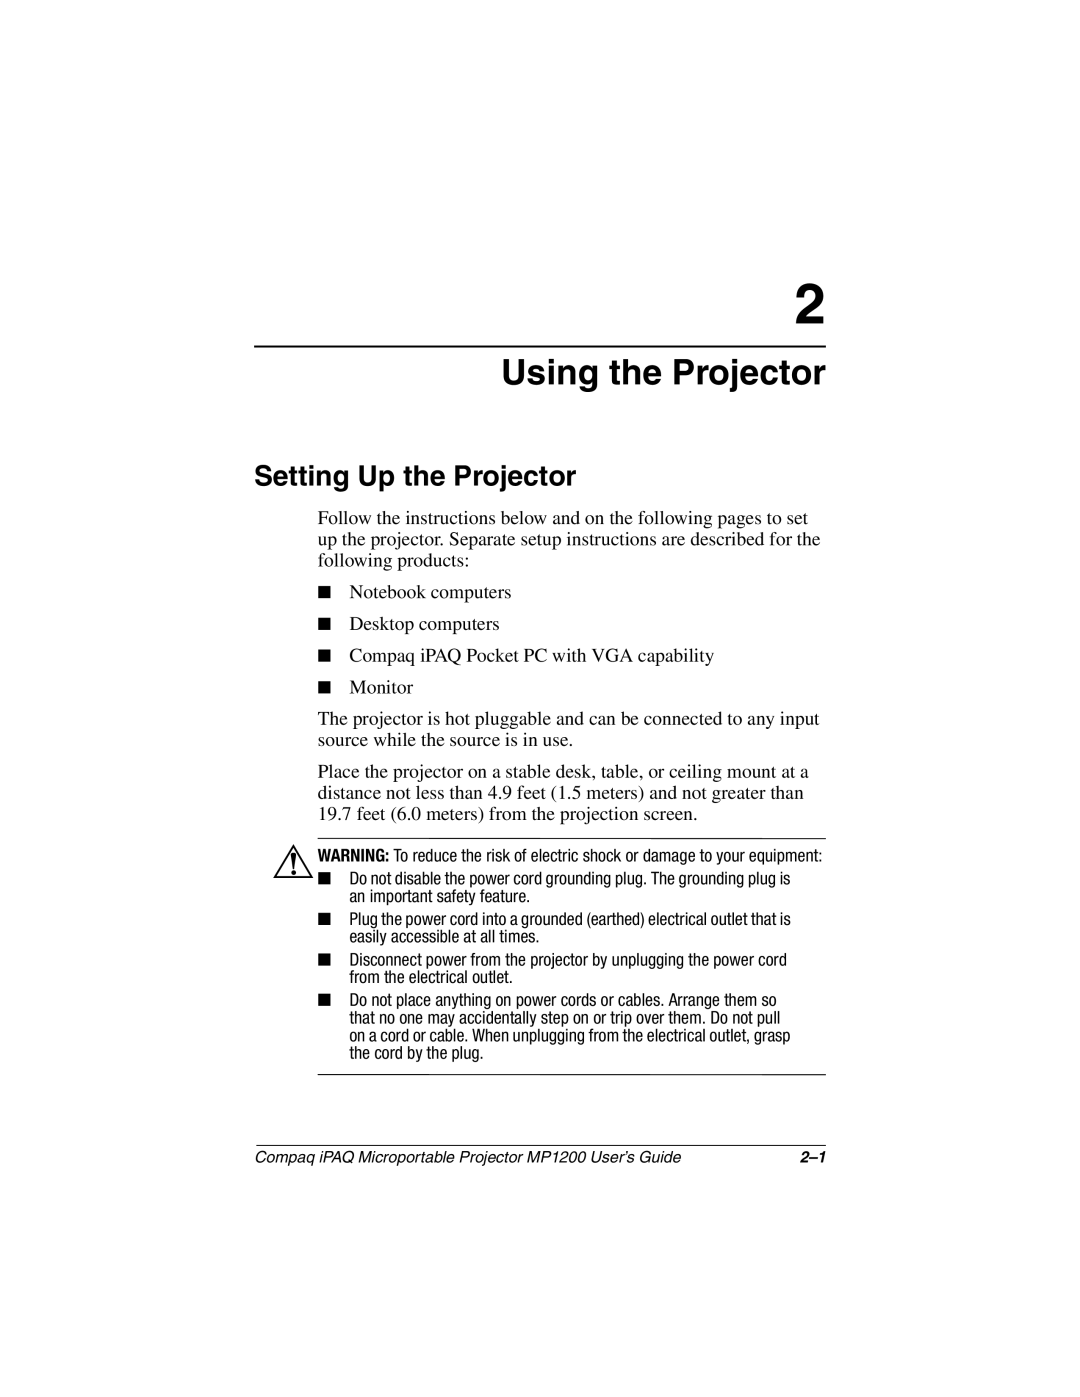 Compaq MP1200 manual Using the Projector, Setting Up the Projector 